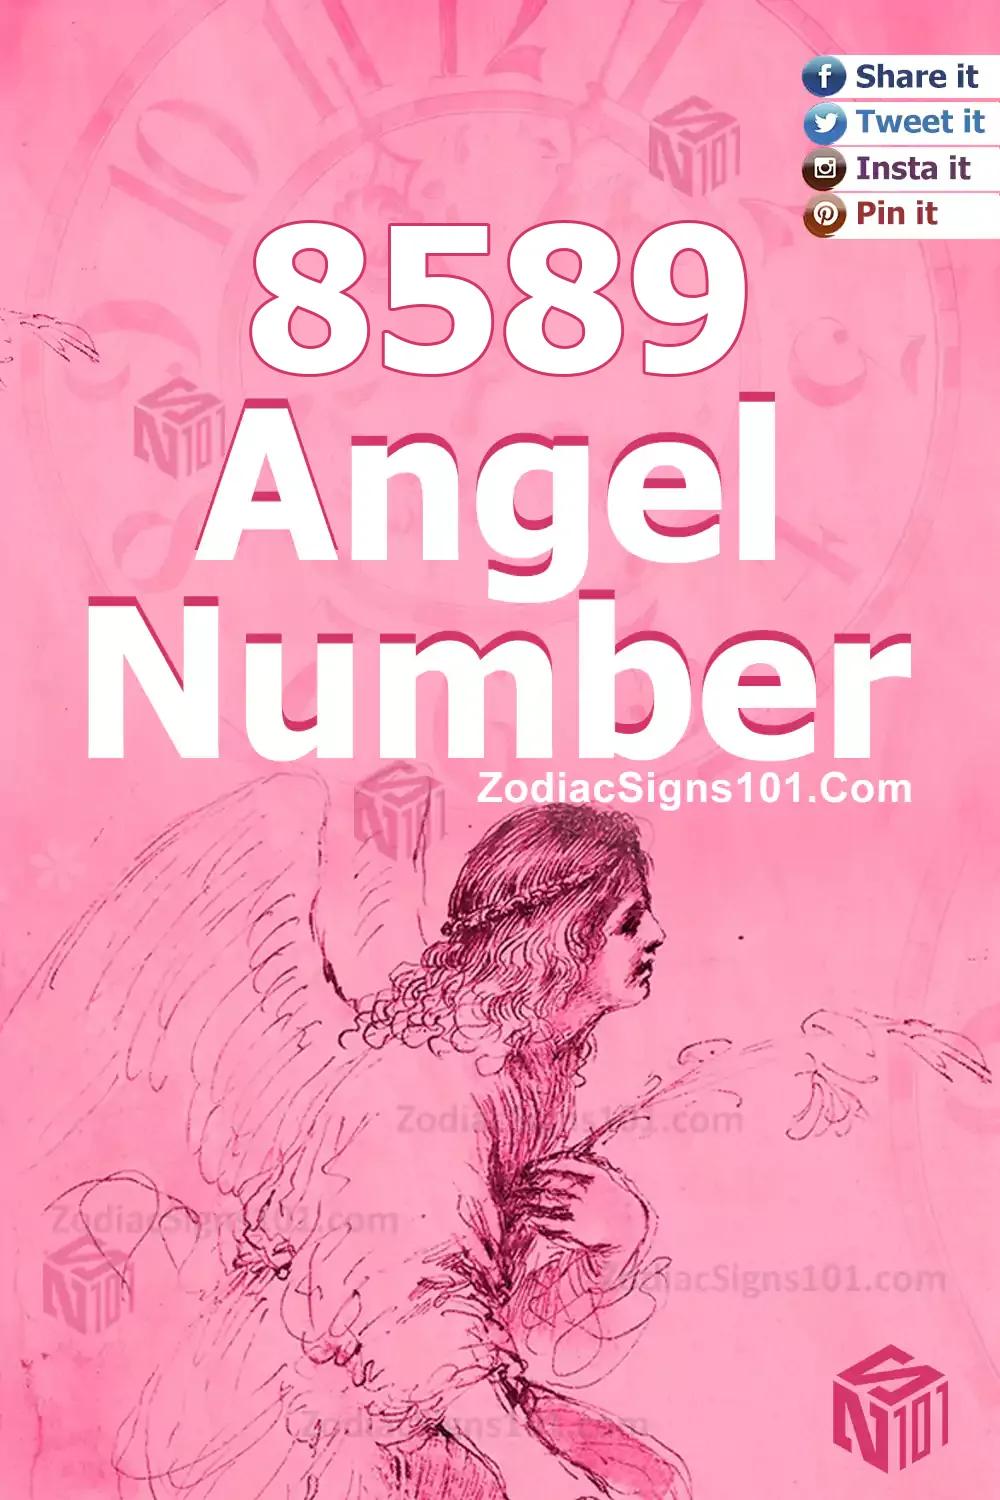 8589 Angel Number Meaning